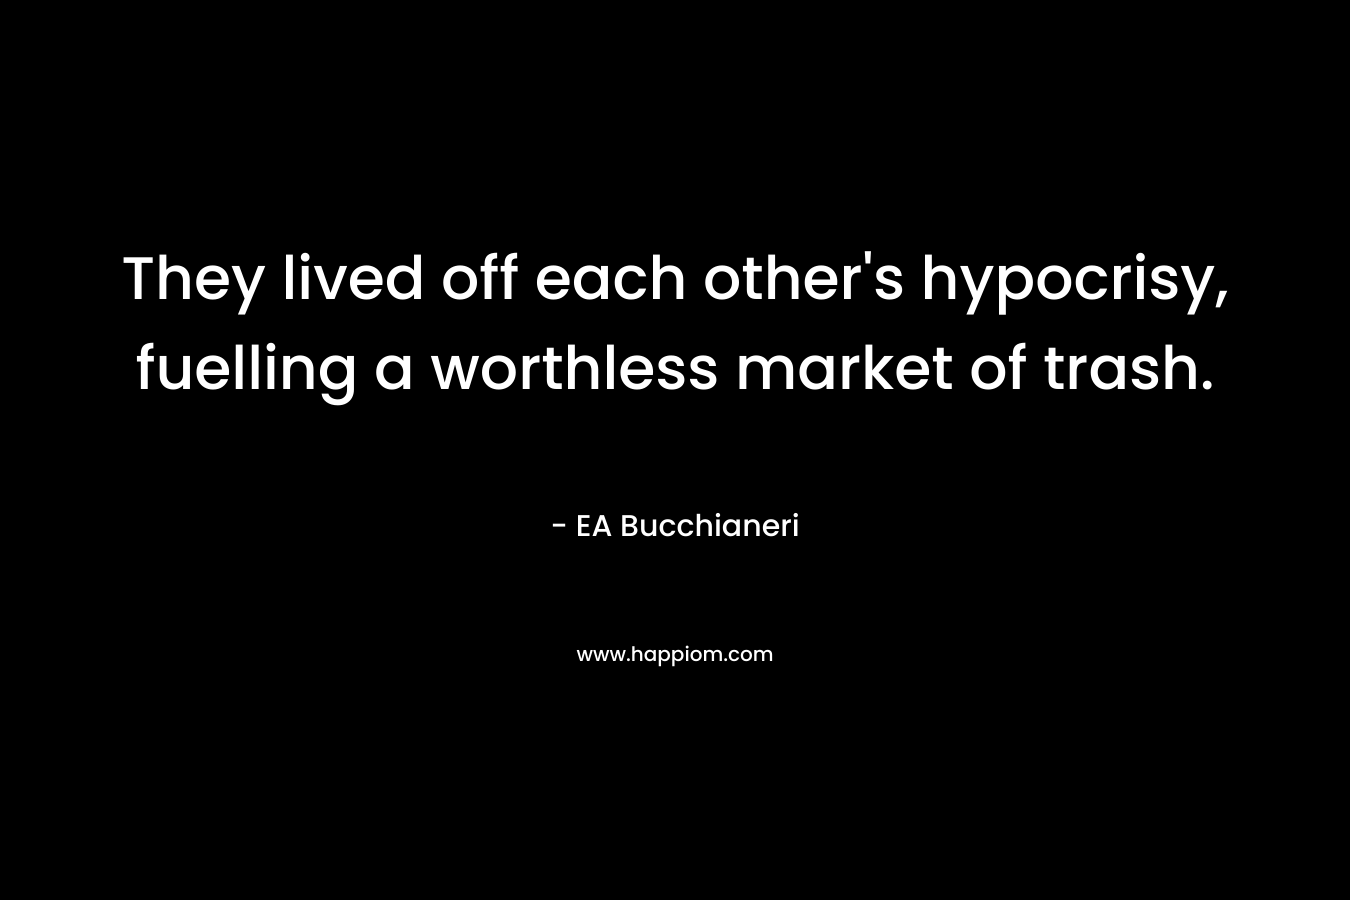 They lived off each other’s hypocrisy, fuelling a worthless market of trash. – EA Bucchianeri